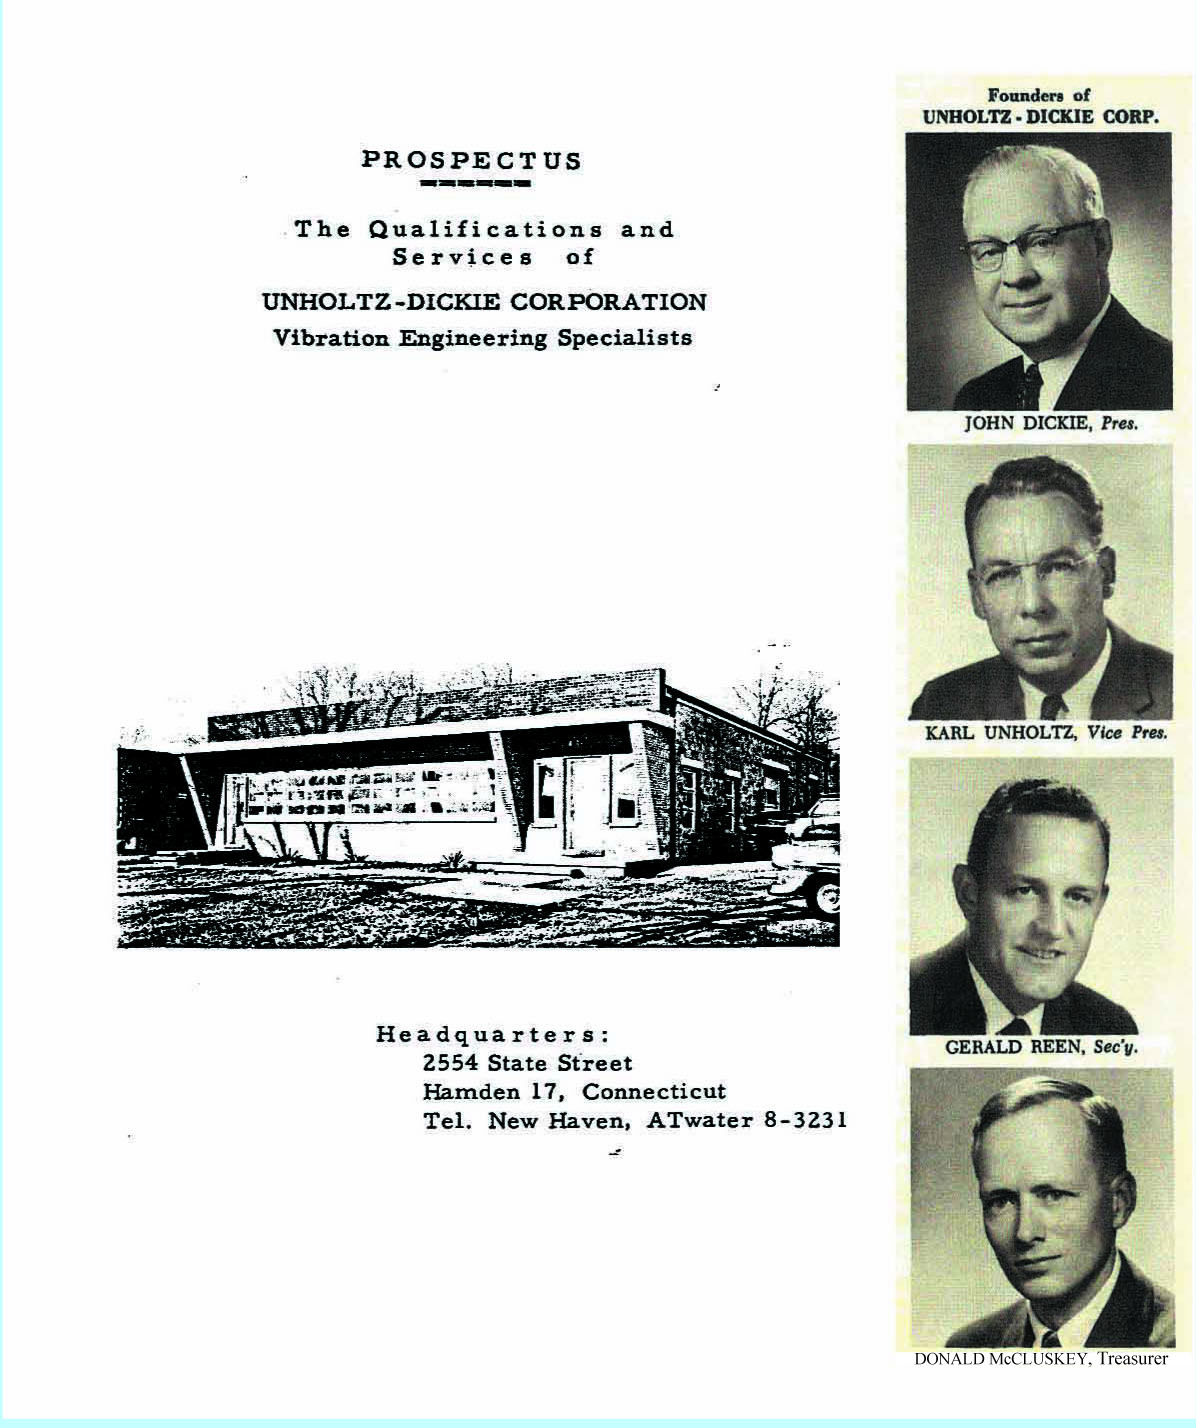 Unholtz-Dickie Corporation in 1940